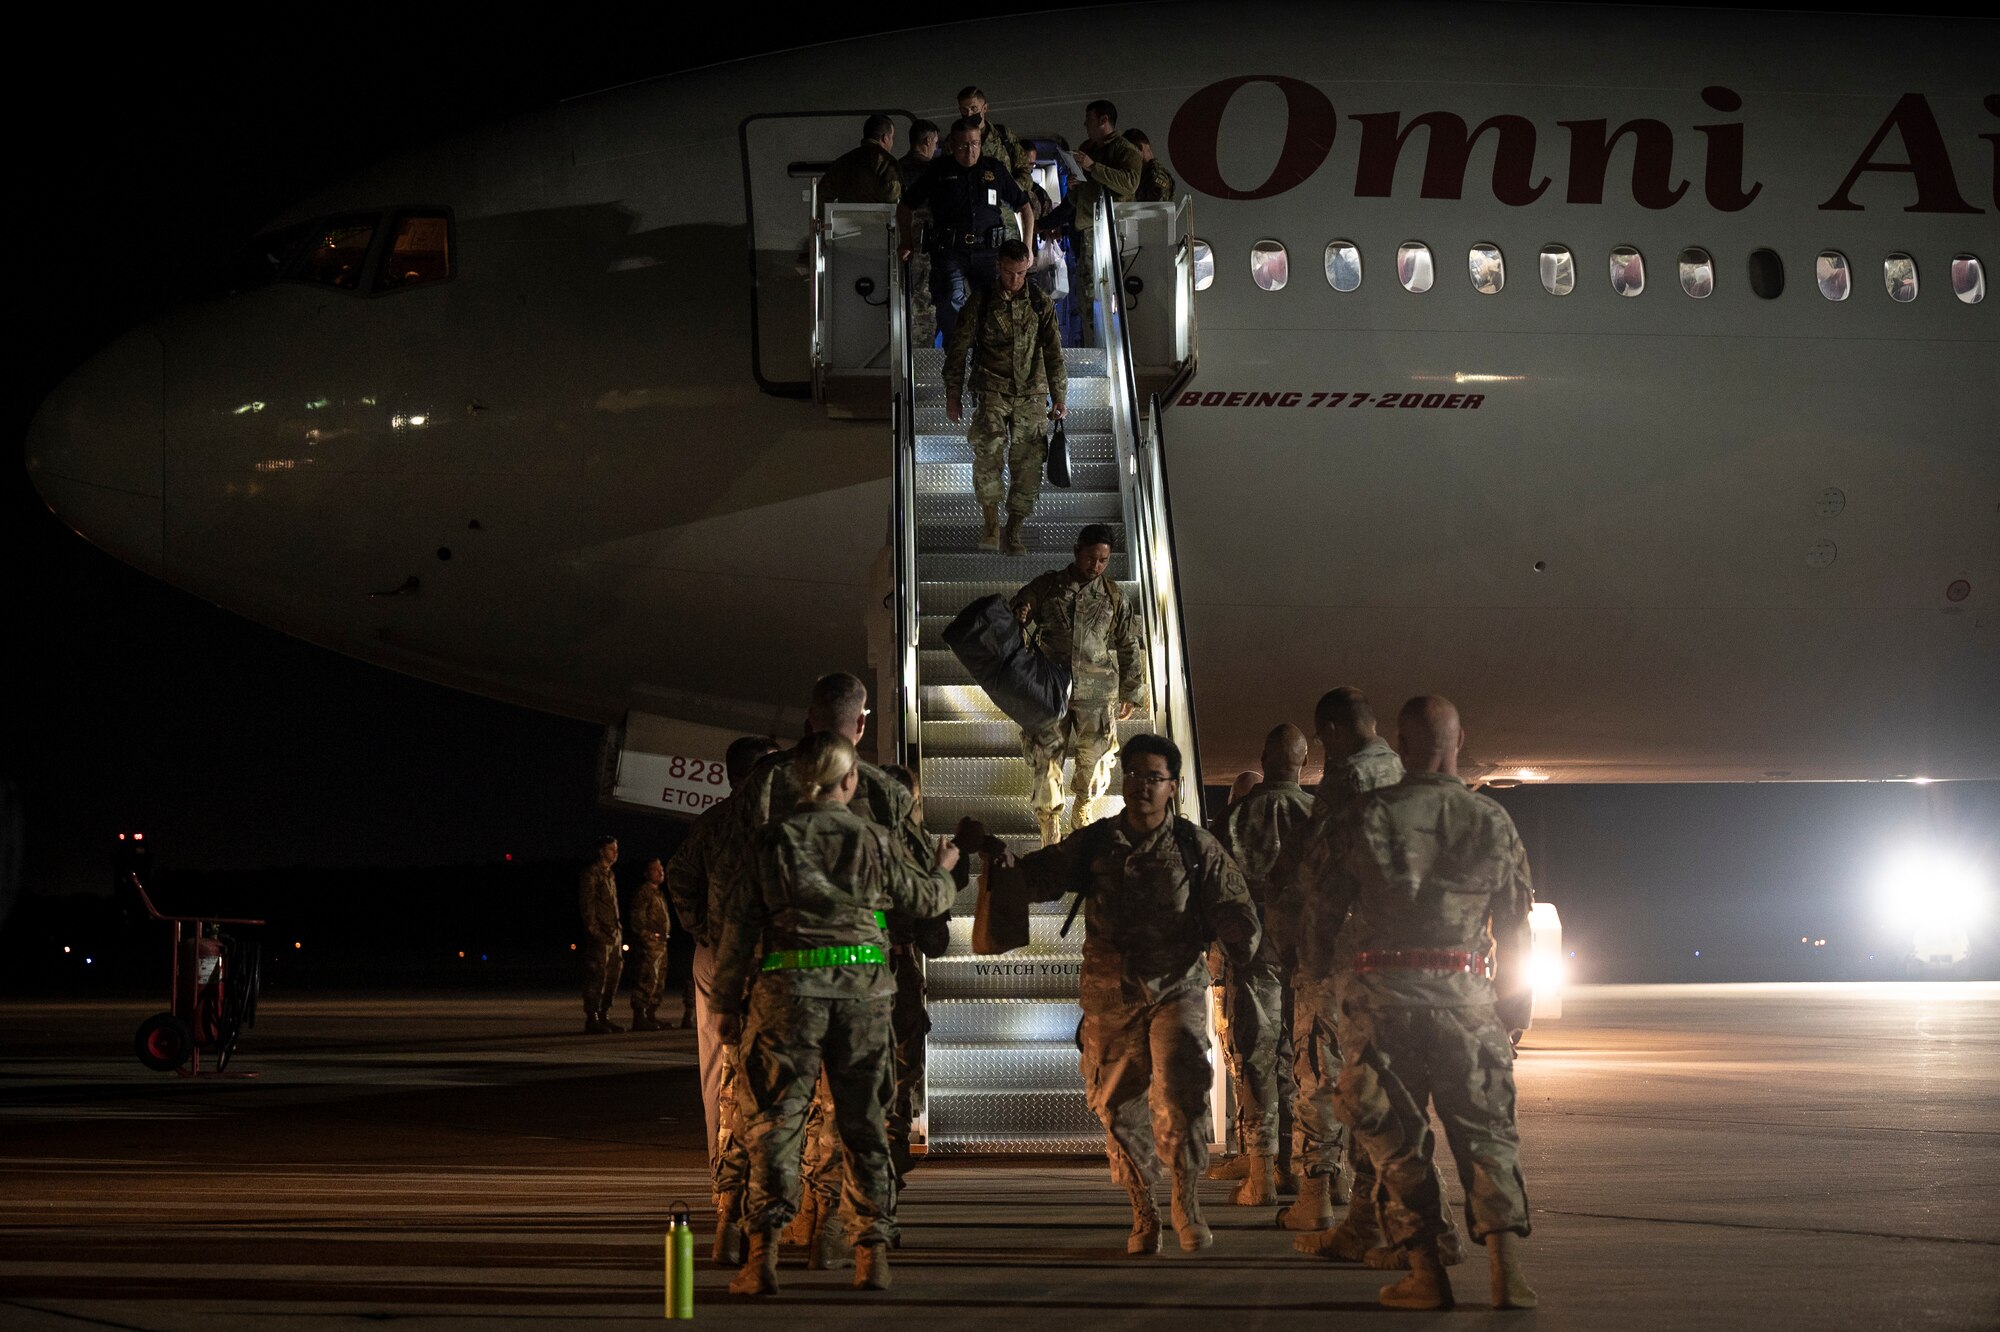 Airmen from Shaw AFB returning home from a deployment